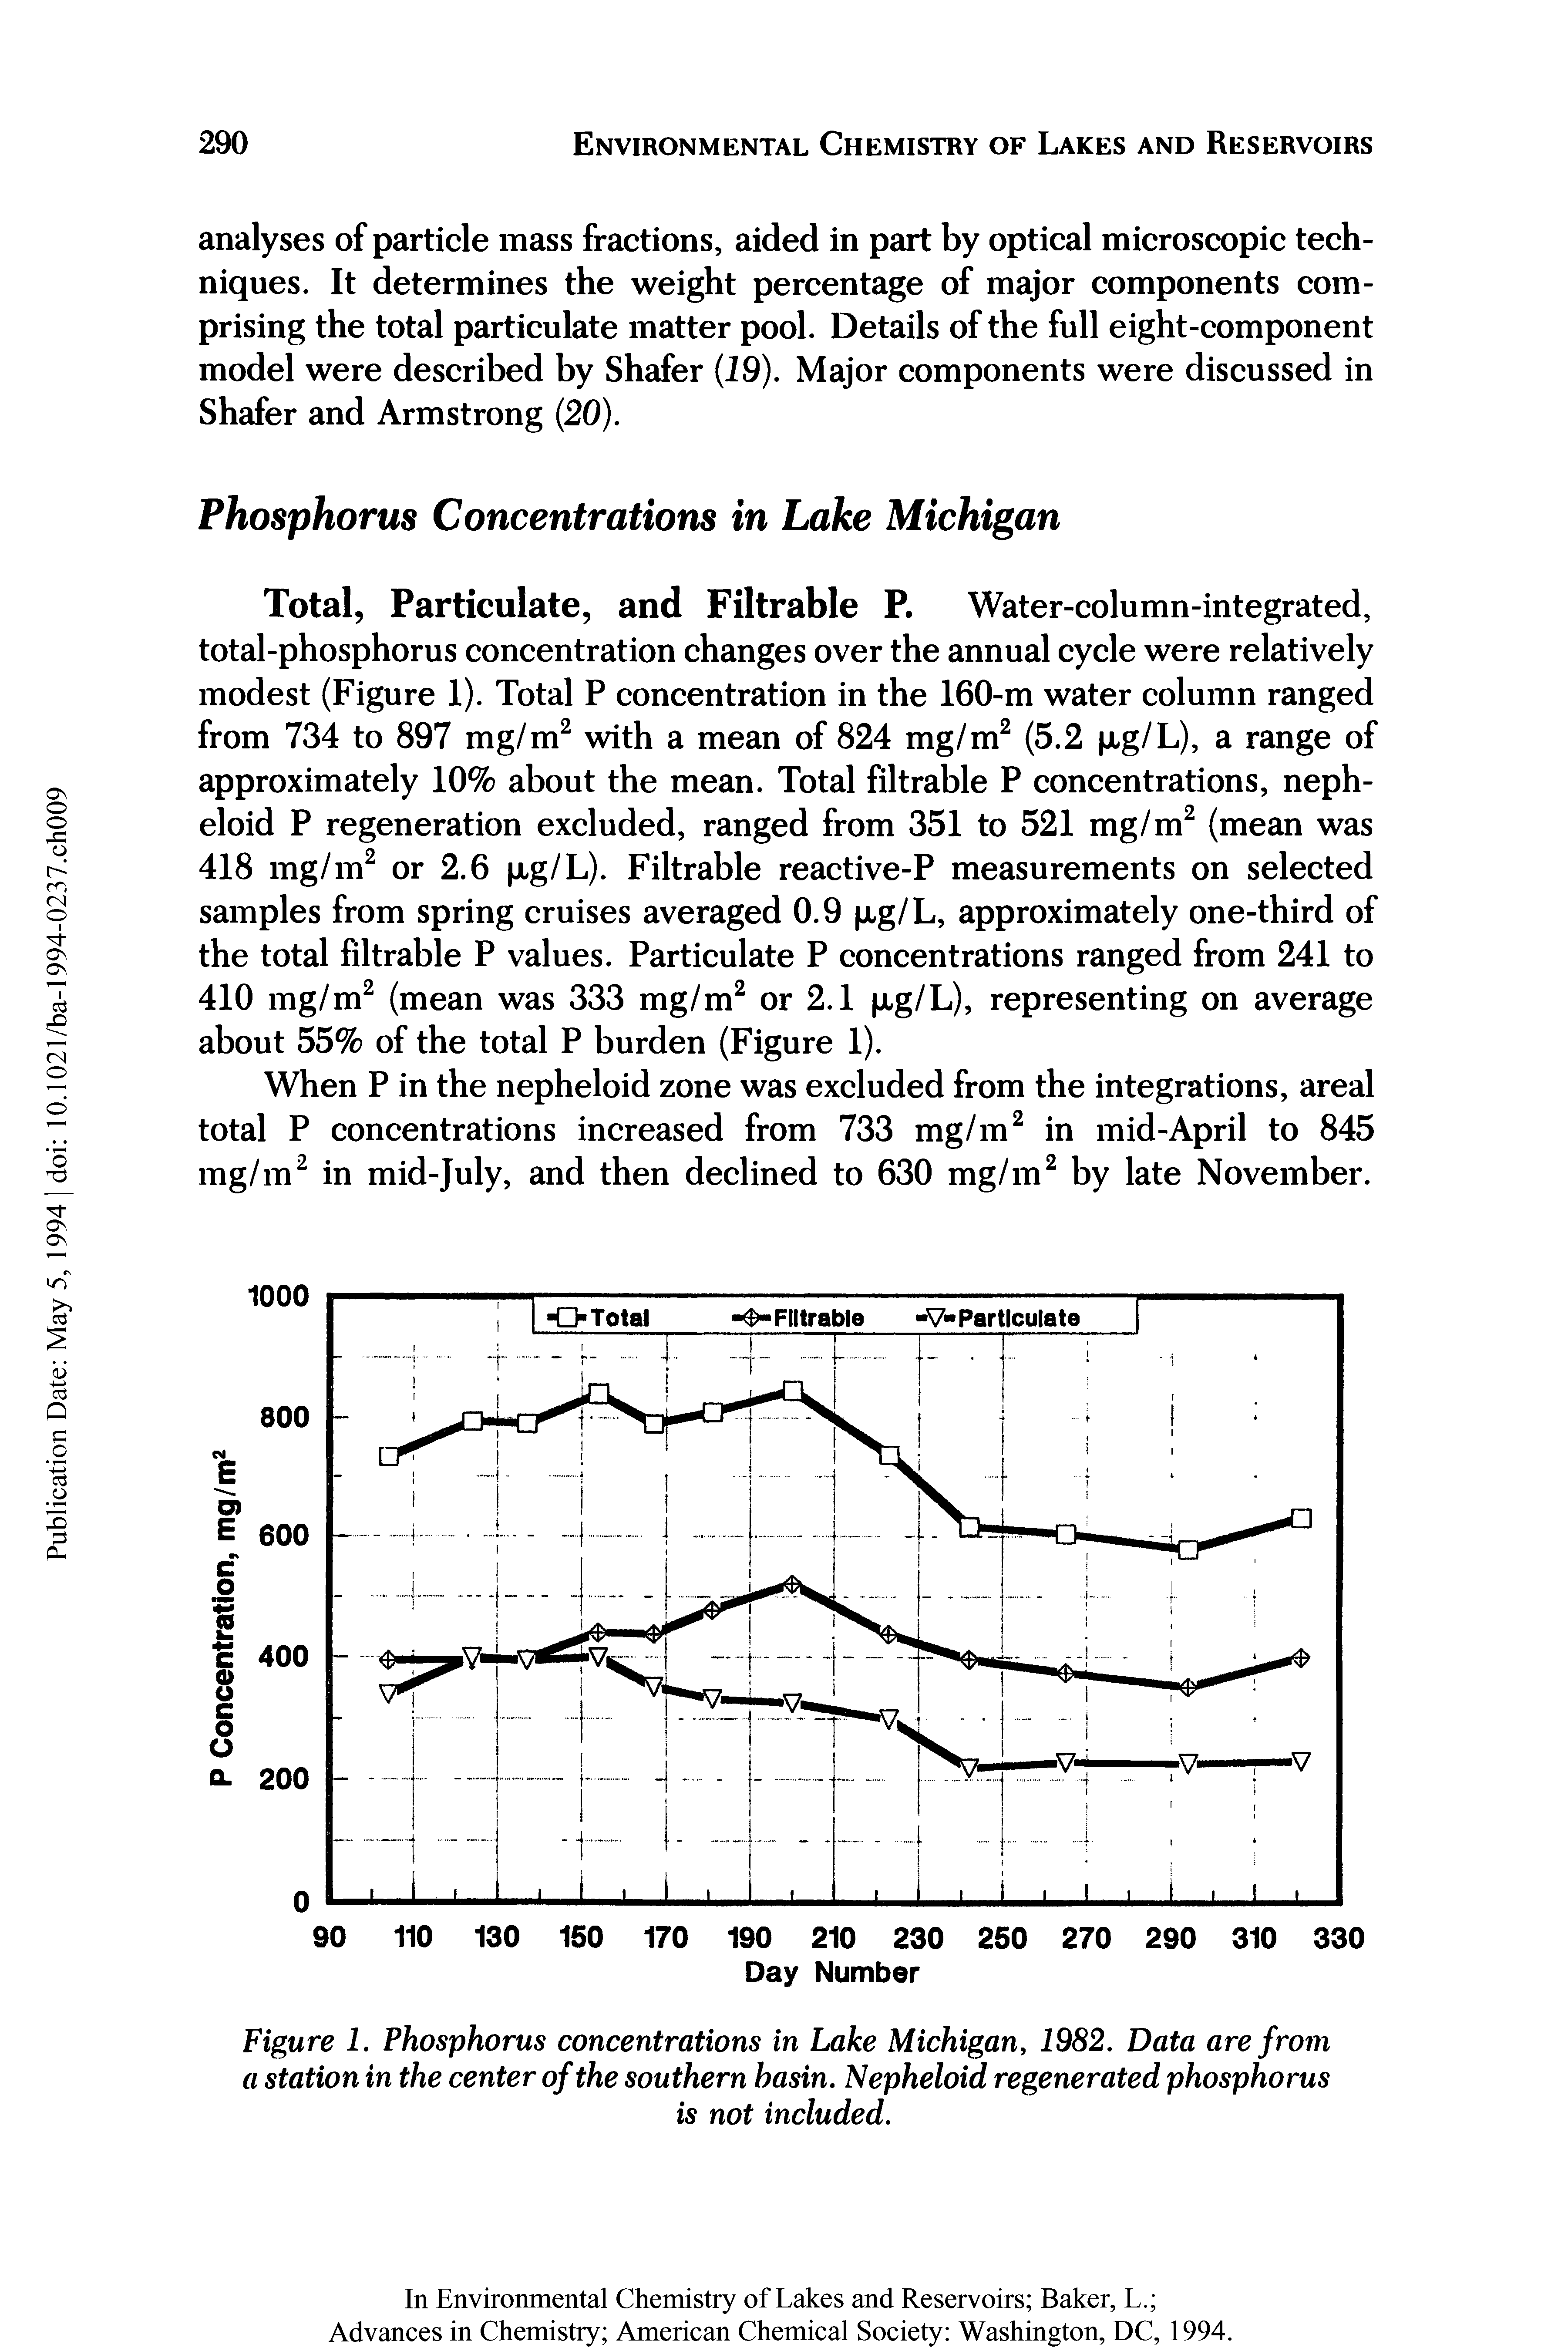 Figure 1. Phosphorus concentrations in Lake Michigan, 1982. Data are from a station in the center of the southern hasin. Nepheloid regenerated phosphorus...